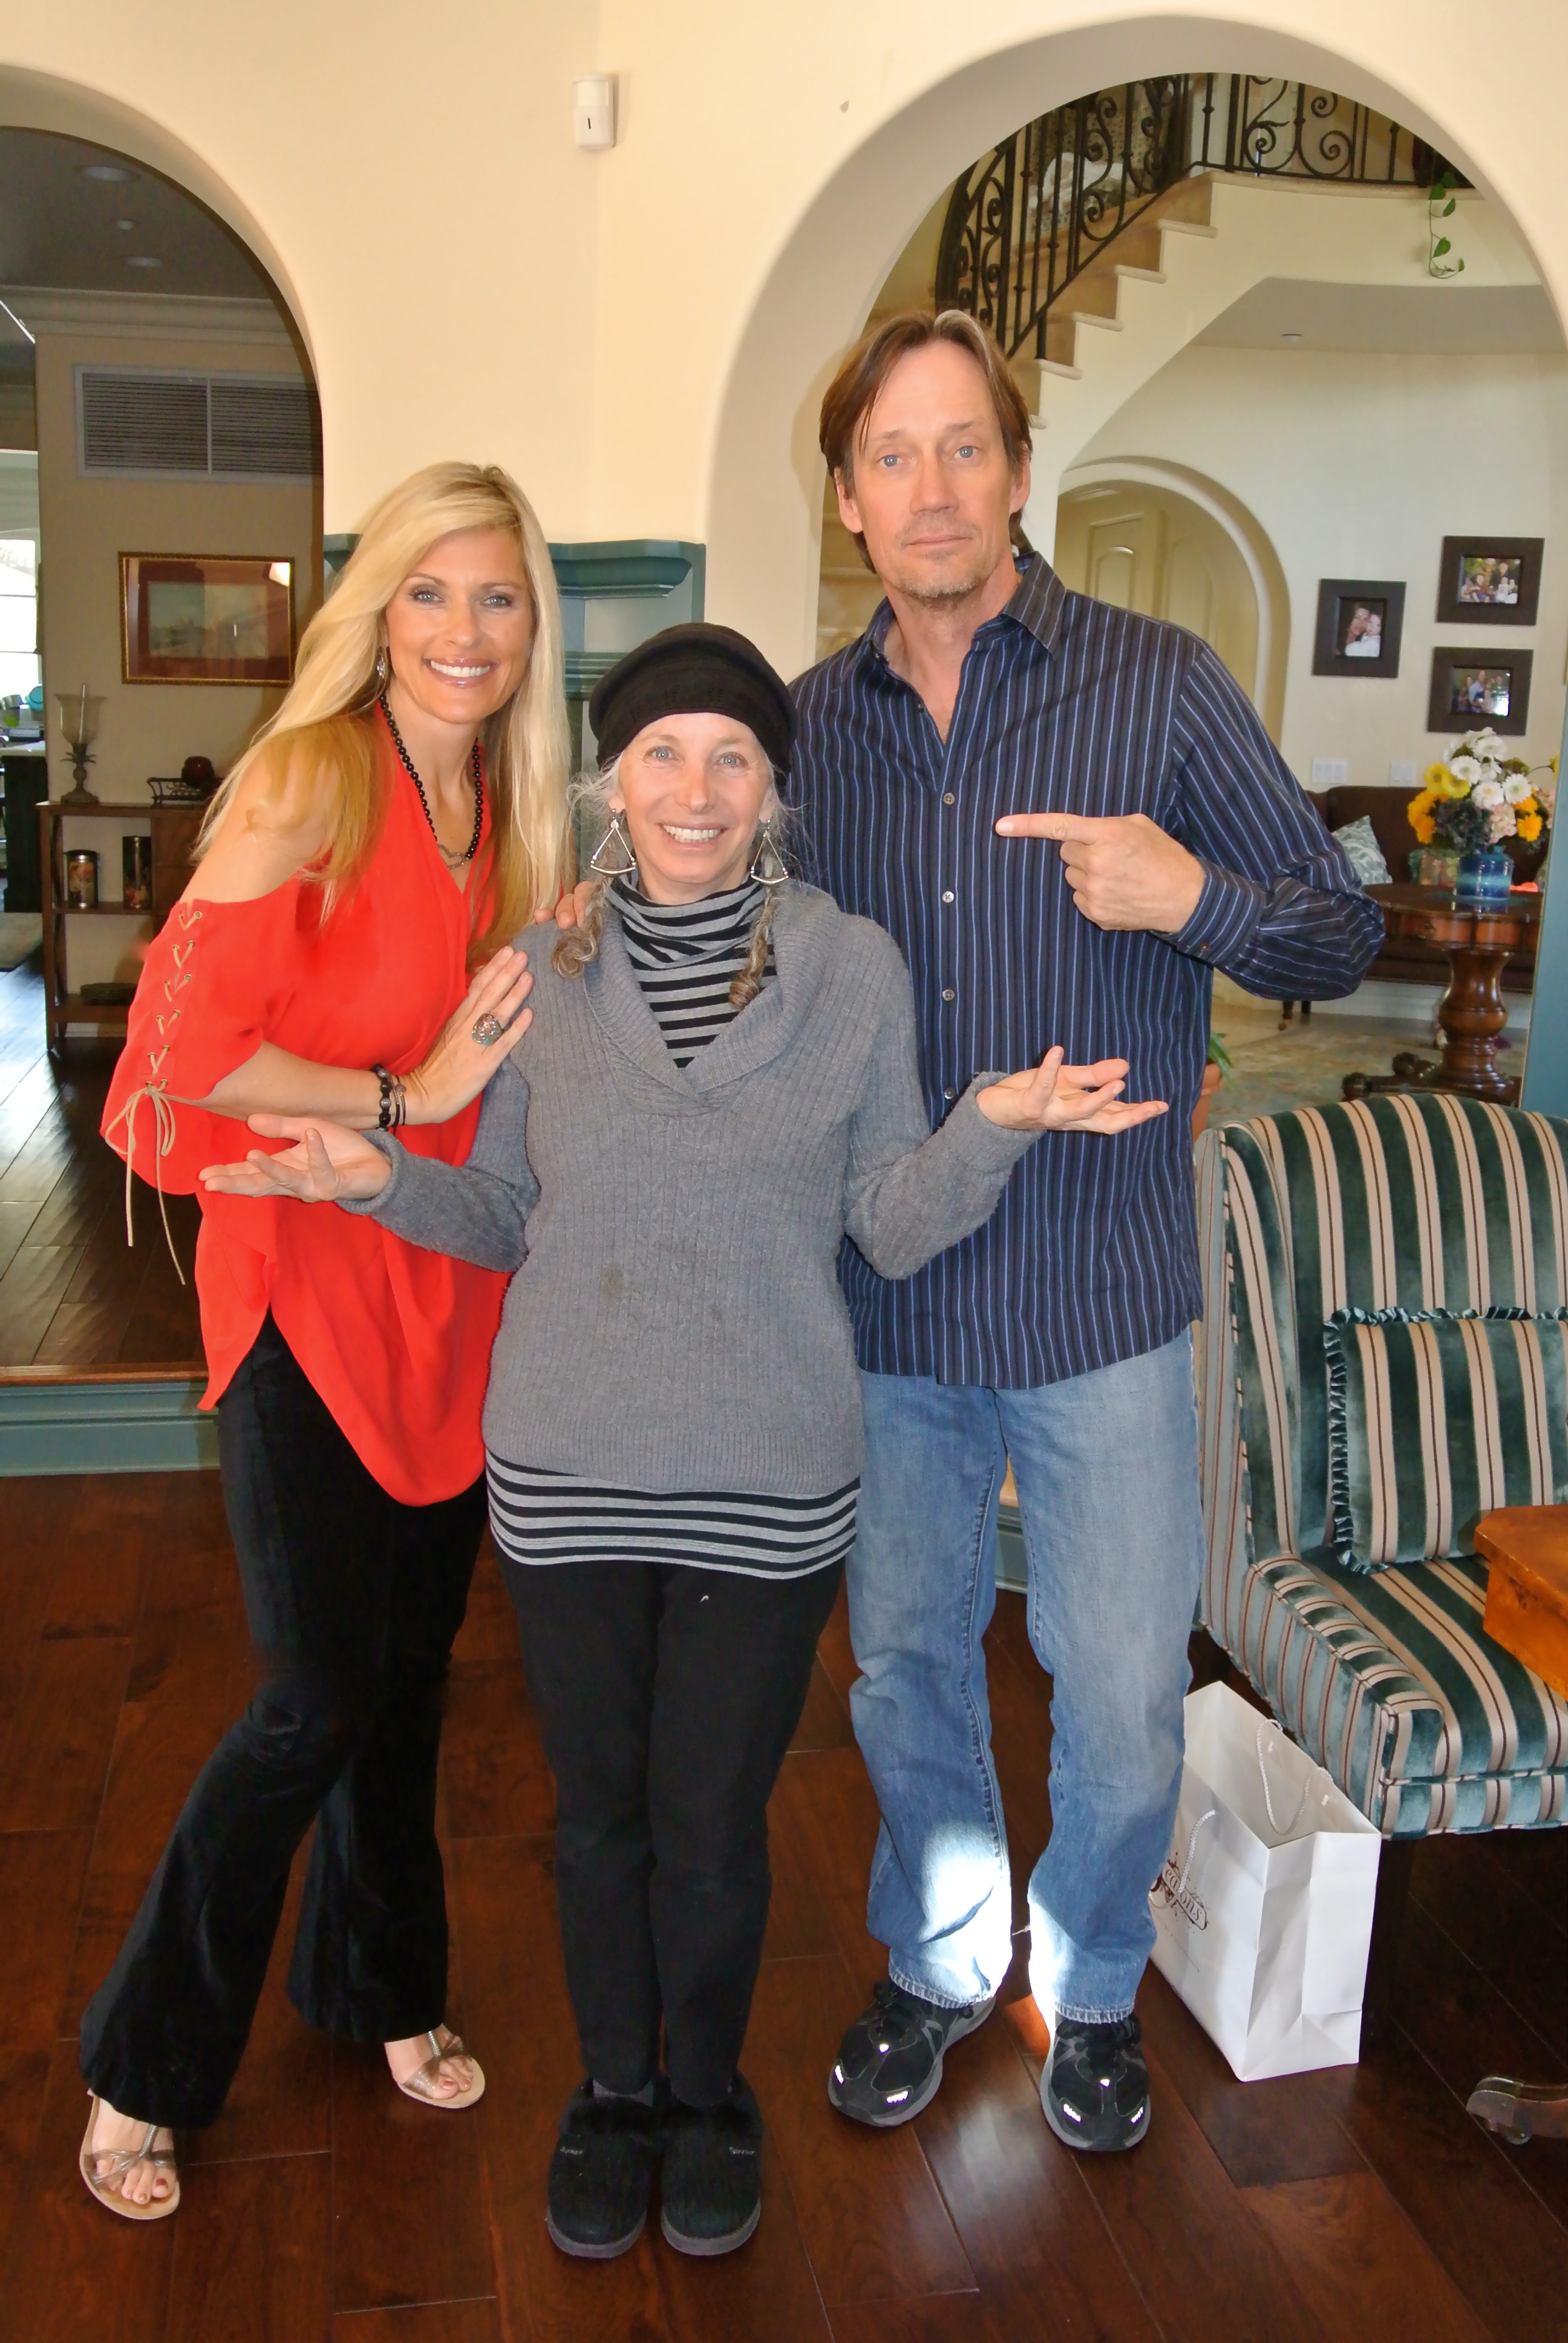 Brenda Epperson, Pepper Jay, and Kevin Sorbo on set on Actors Reporter Interviews.